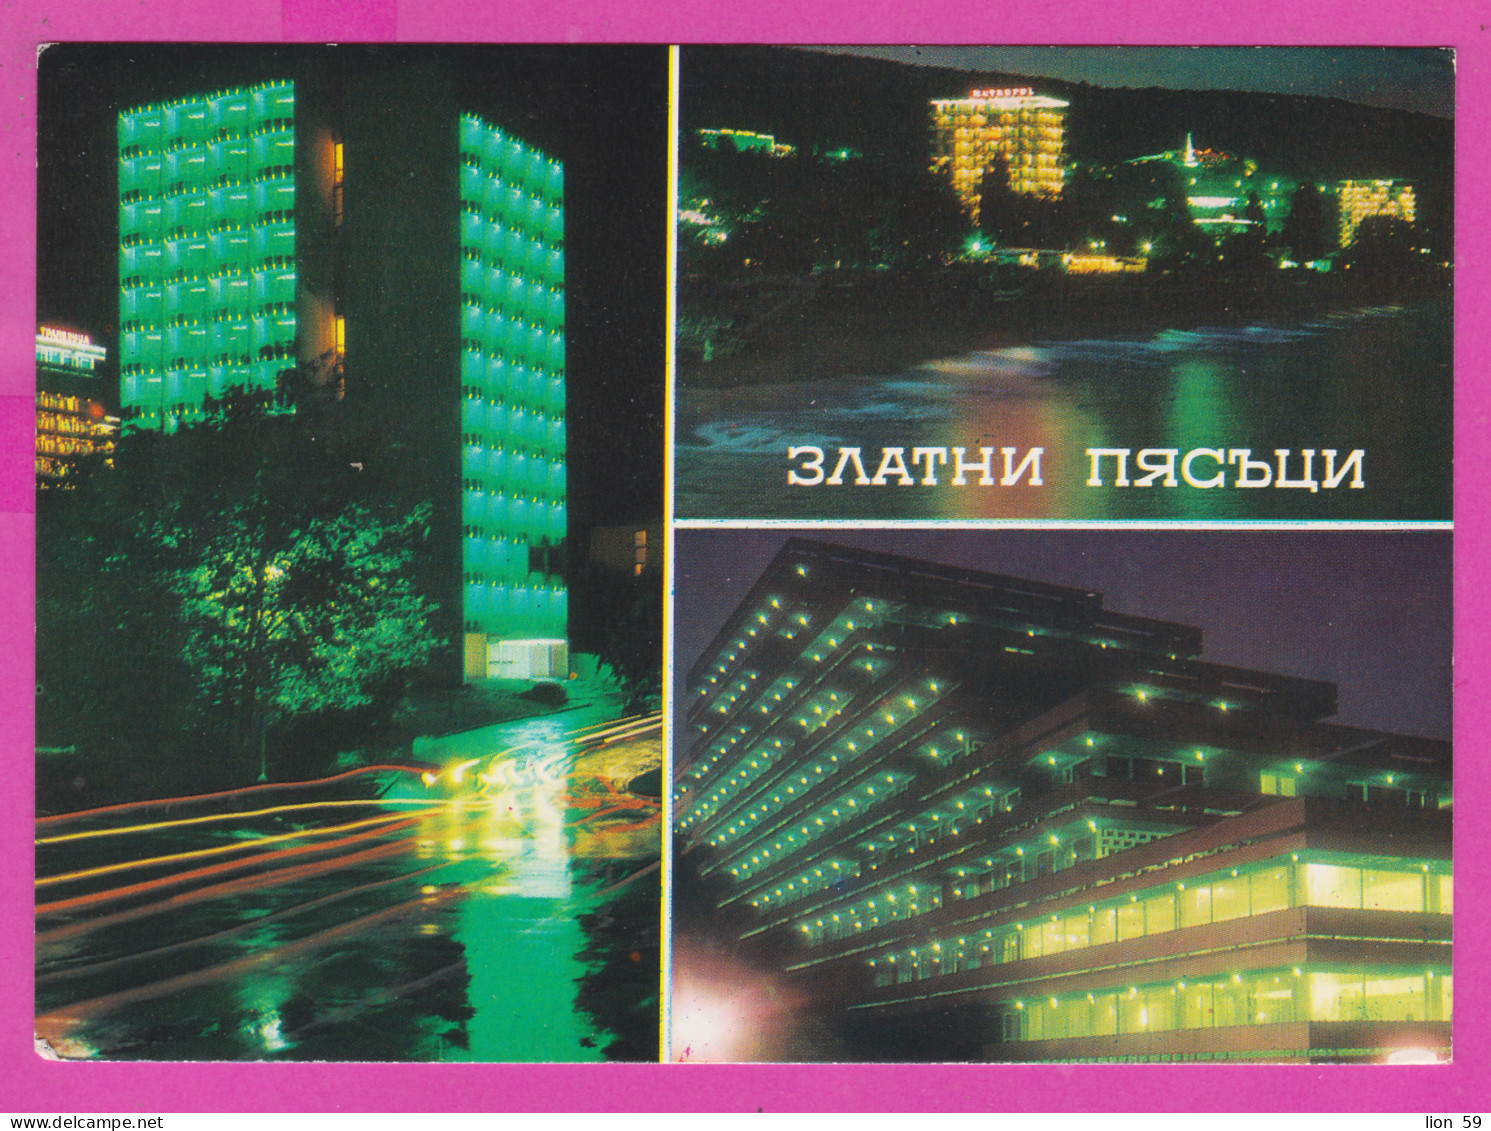 309658 / Bulgaria - Golden Sands (Varna) Night Hotels Black Sea Resort PC 1980 USED - 5 St Kozloduy Nuclear Power Plant - Covers & Documents